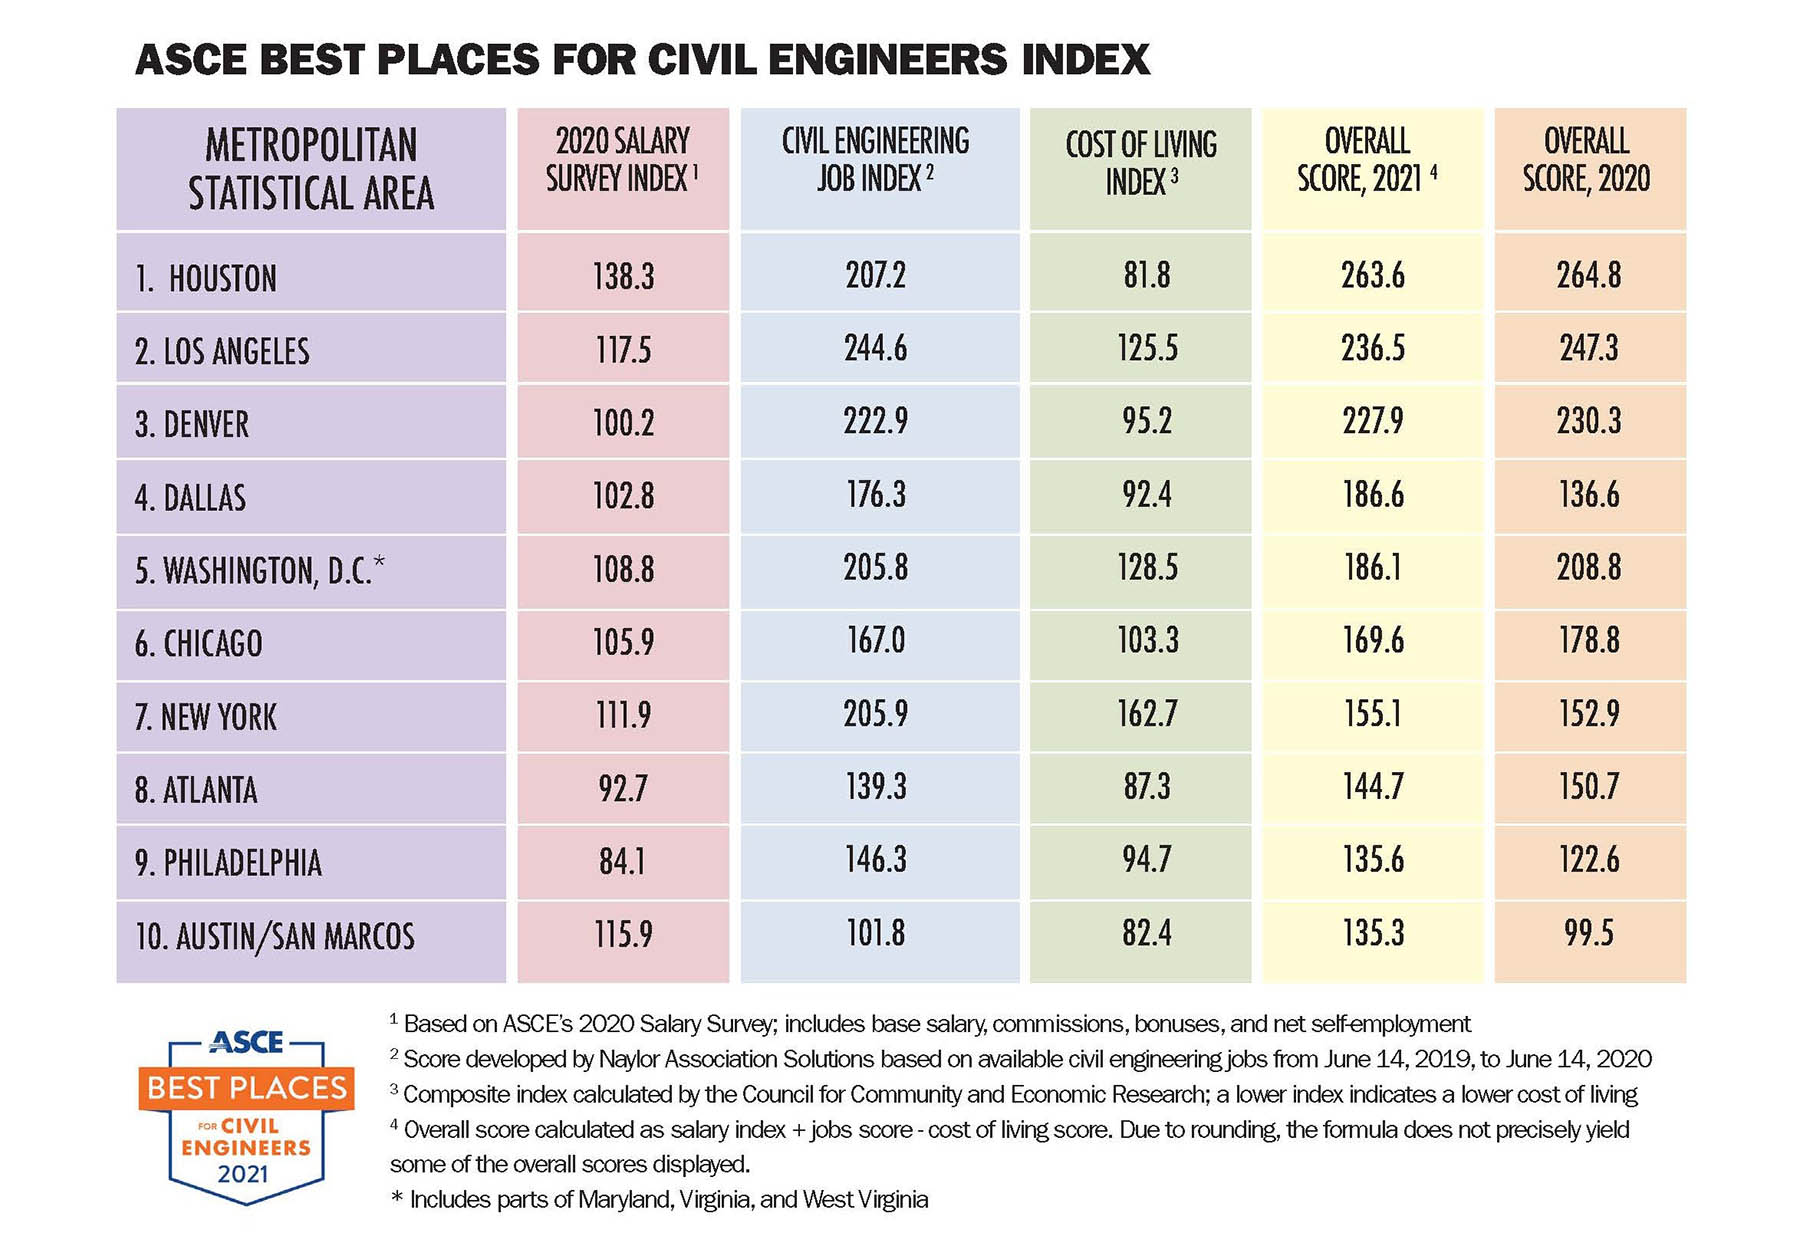 chart showing the ten best places for civil engineers in the US in 2020 in terms of salary, cost of living and other factors. Houston tops the list.